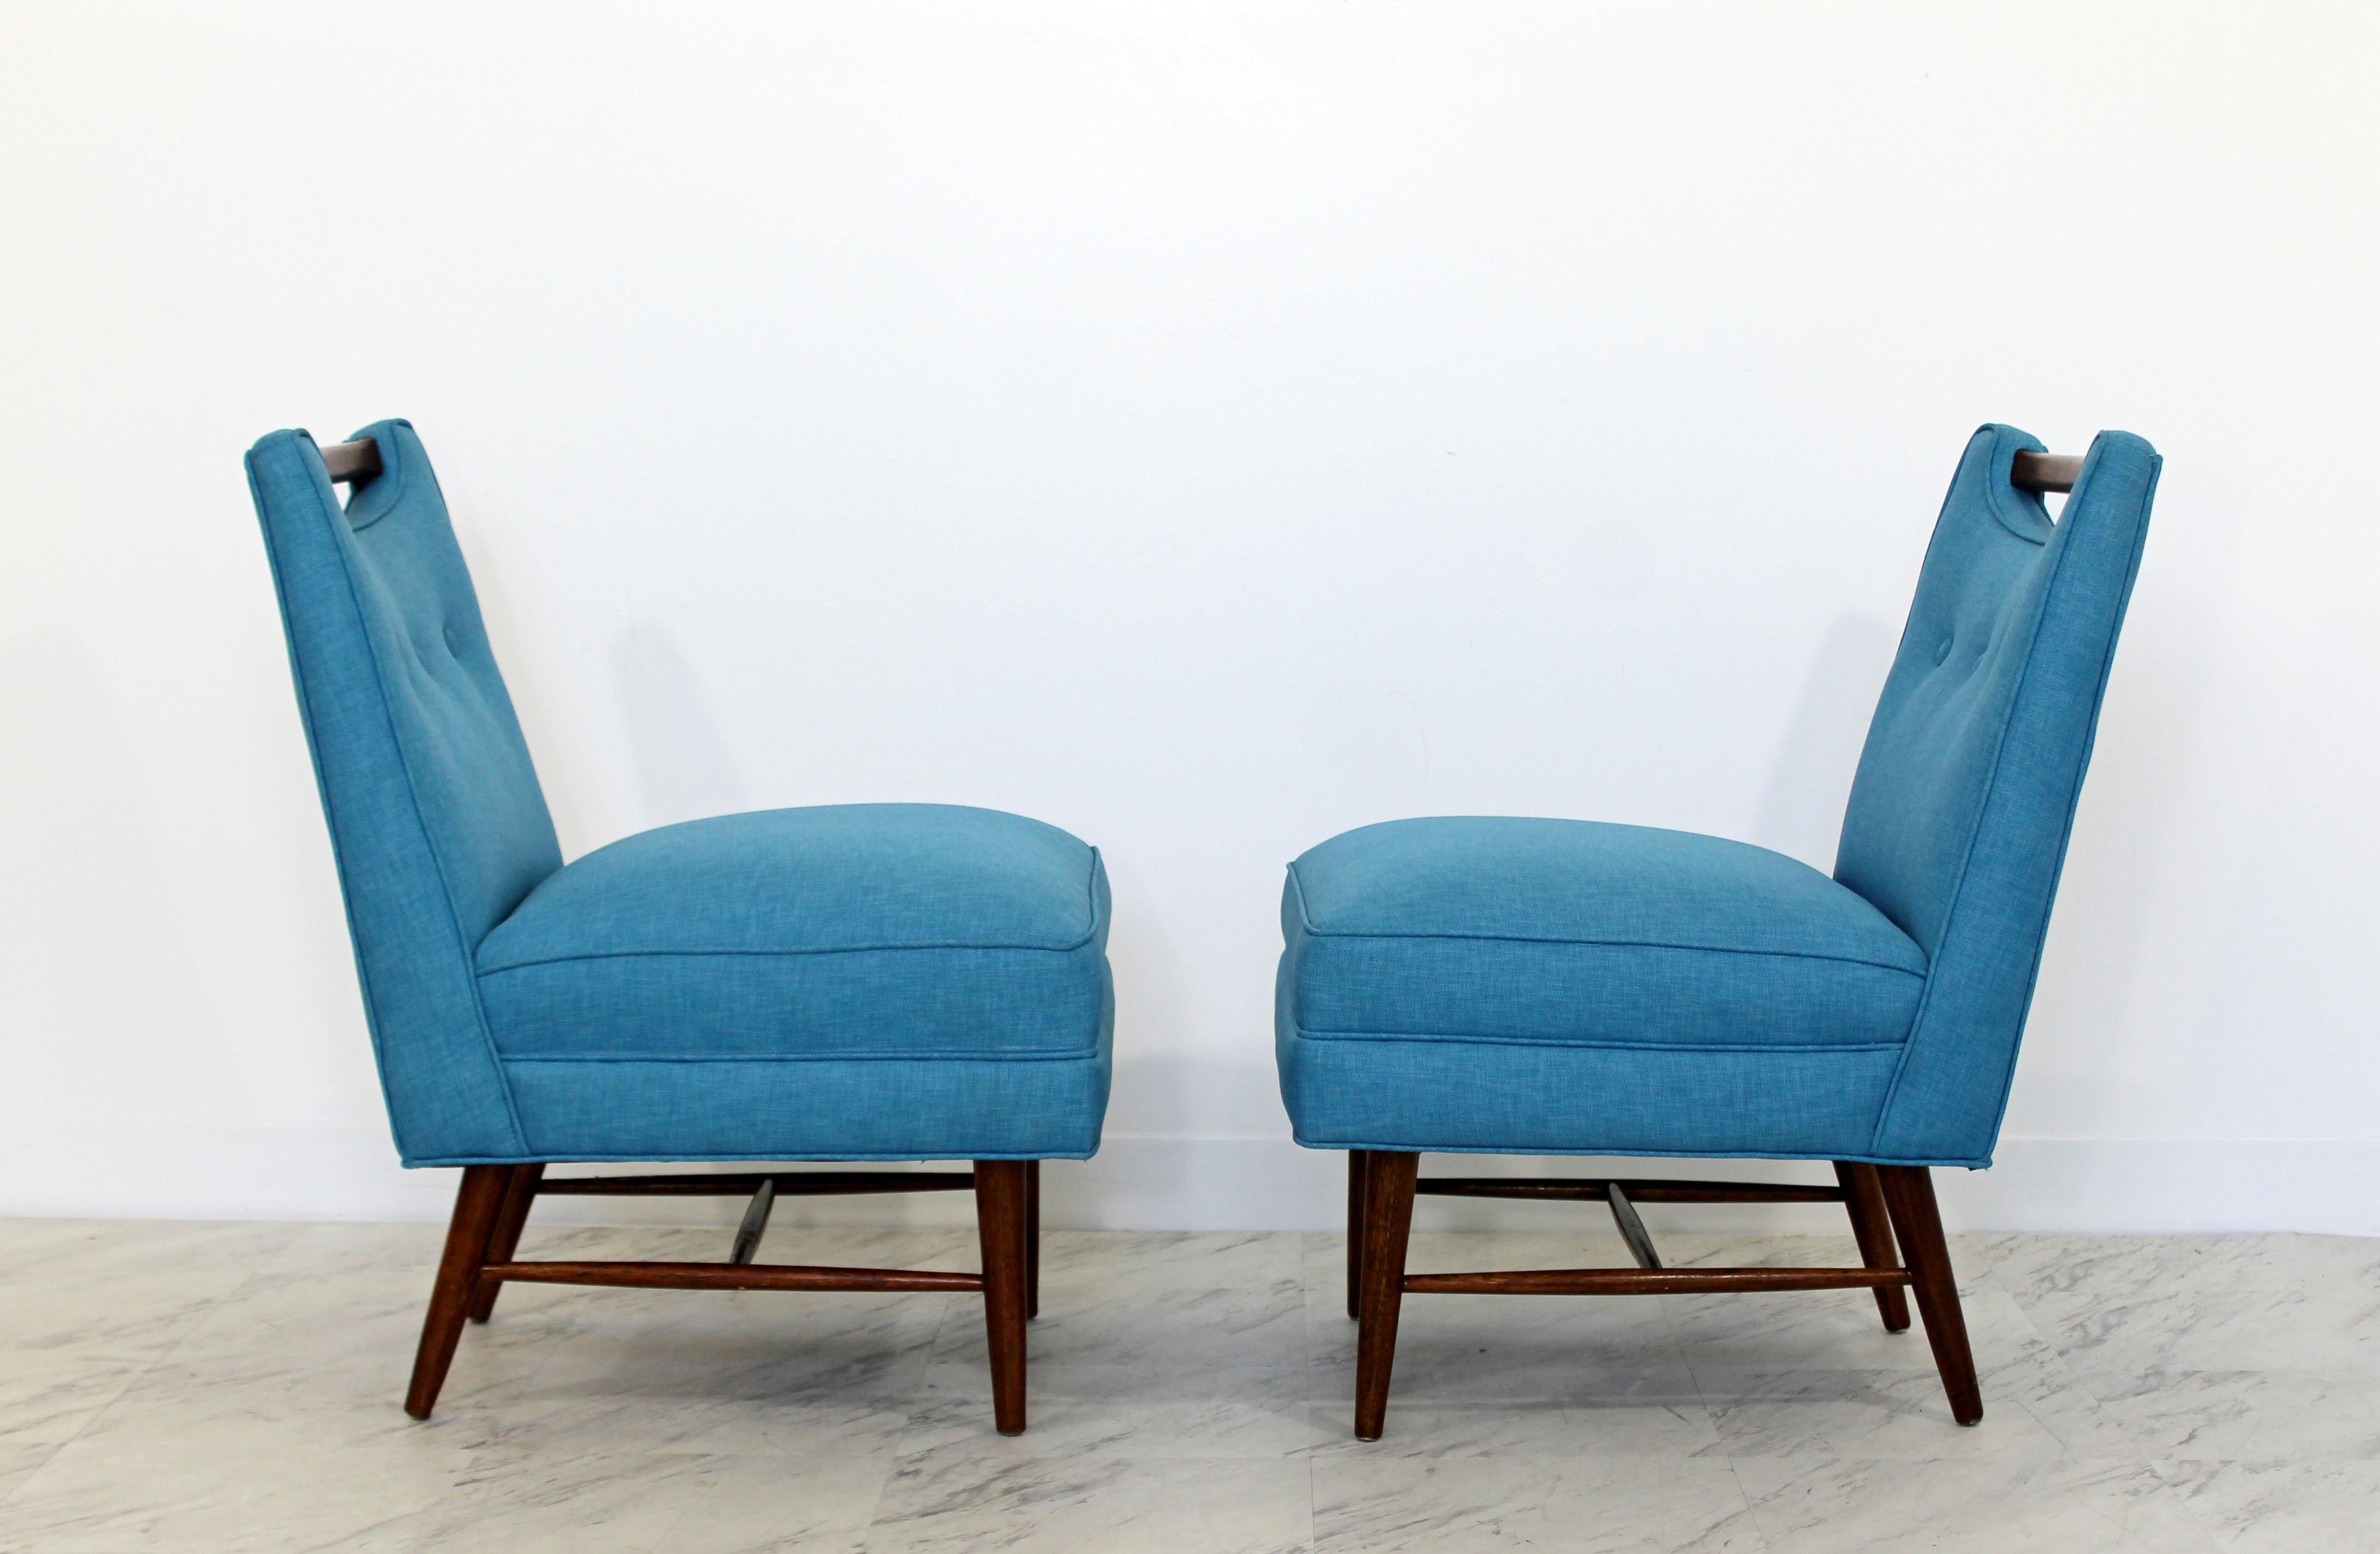 For your consideration is phenomenally impeccable, pair of slipper chairs, with wooden handles or pulls at the top of the back, by Harvey Probber, circa the 1950s. Just came back from being professionally reupholstered in a vintage Knoll fabric. In